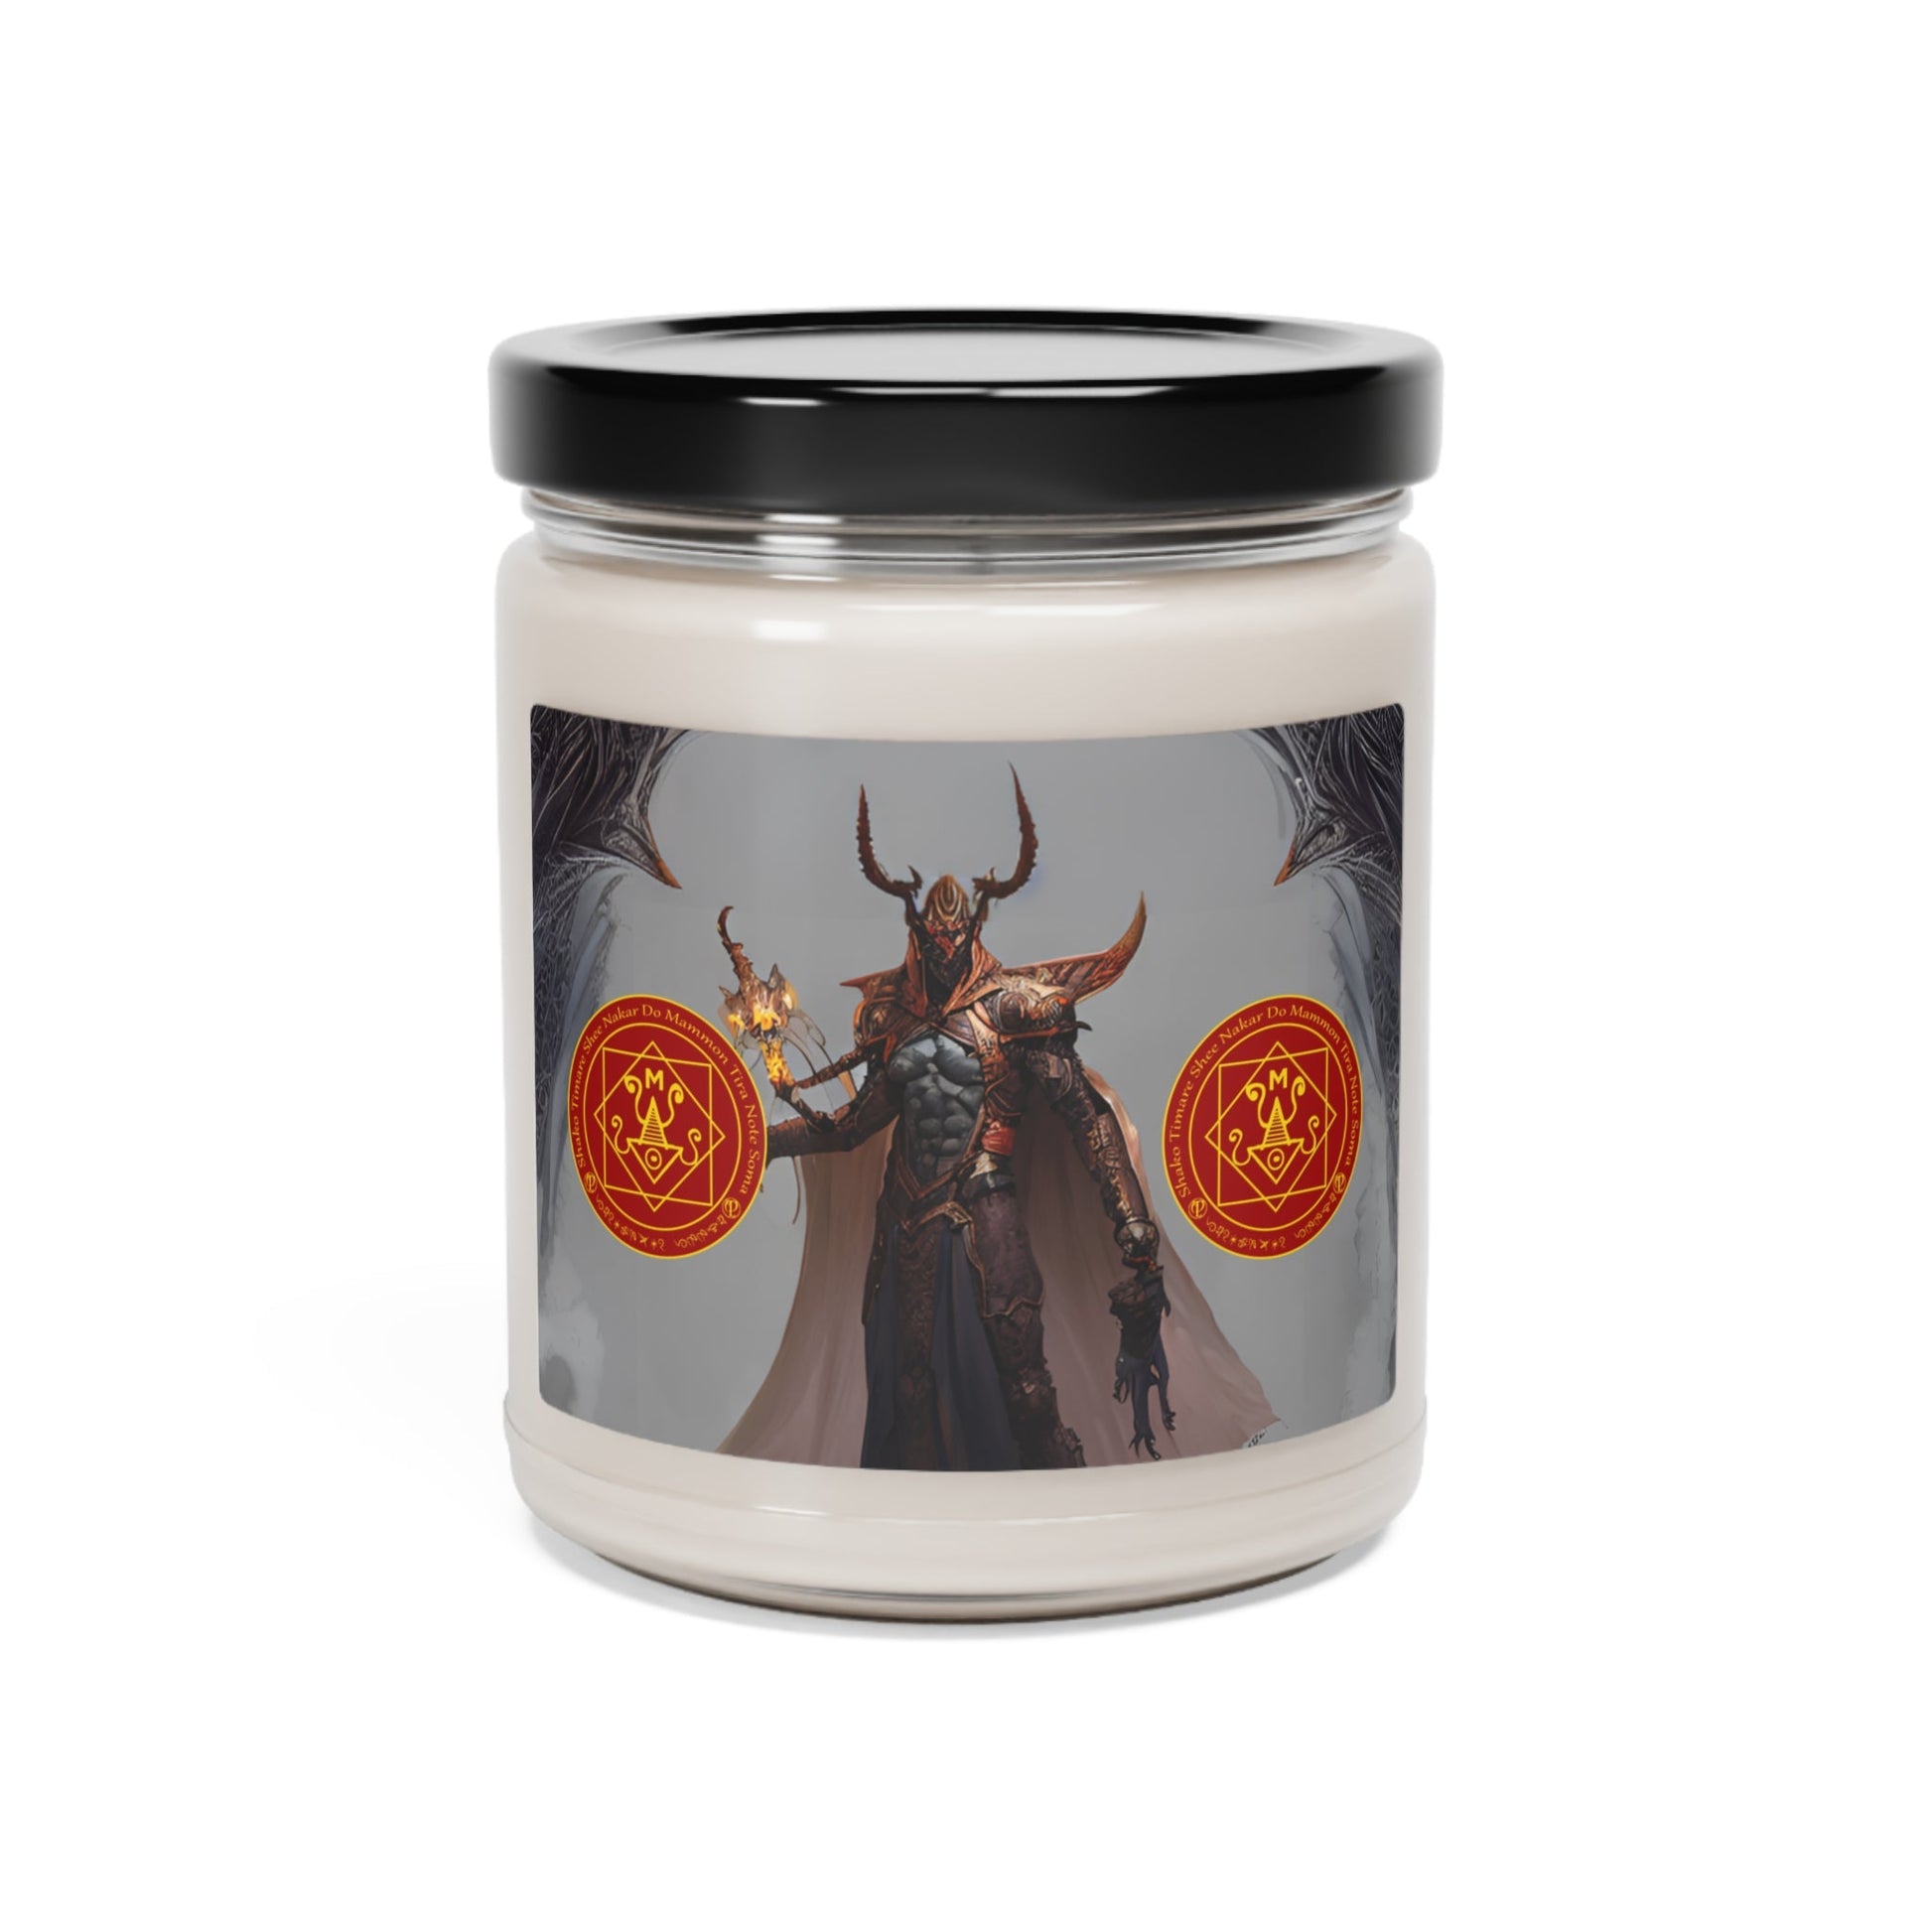 Demon-Mammon-Altar-Scented-Soy-Candle-for-Money-related-offerings-rituals-initiations-or-praying-and-meditation-16